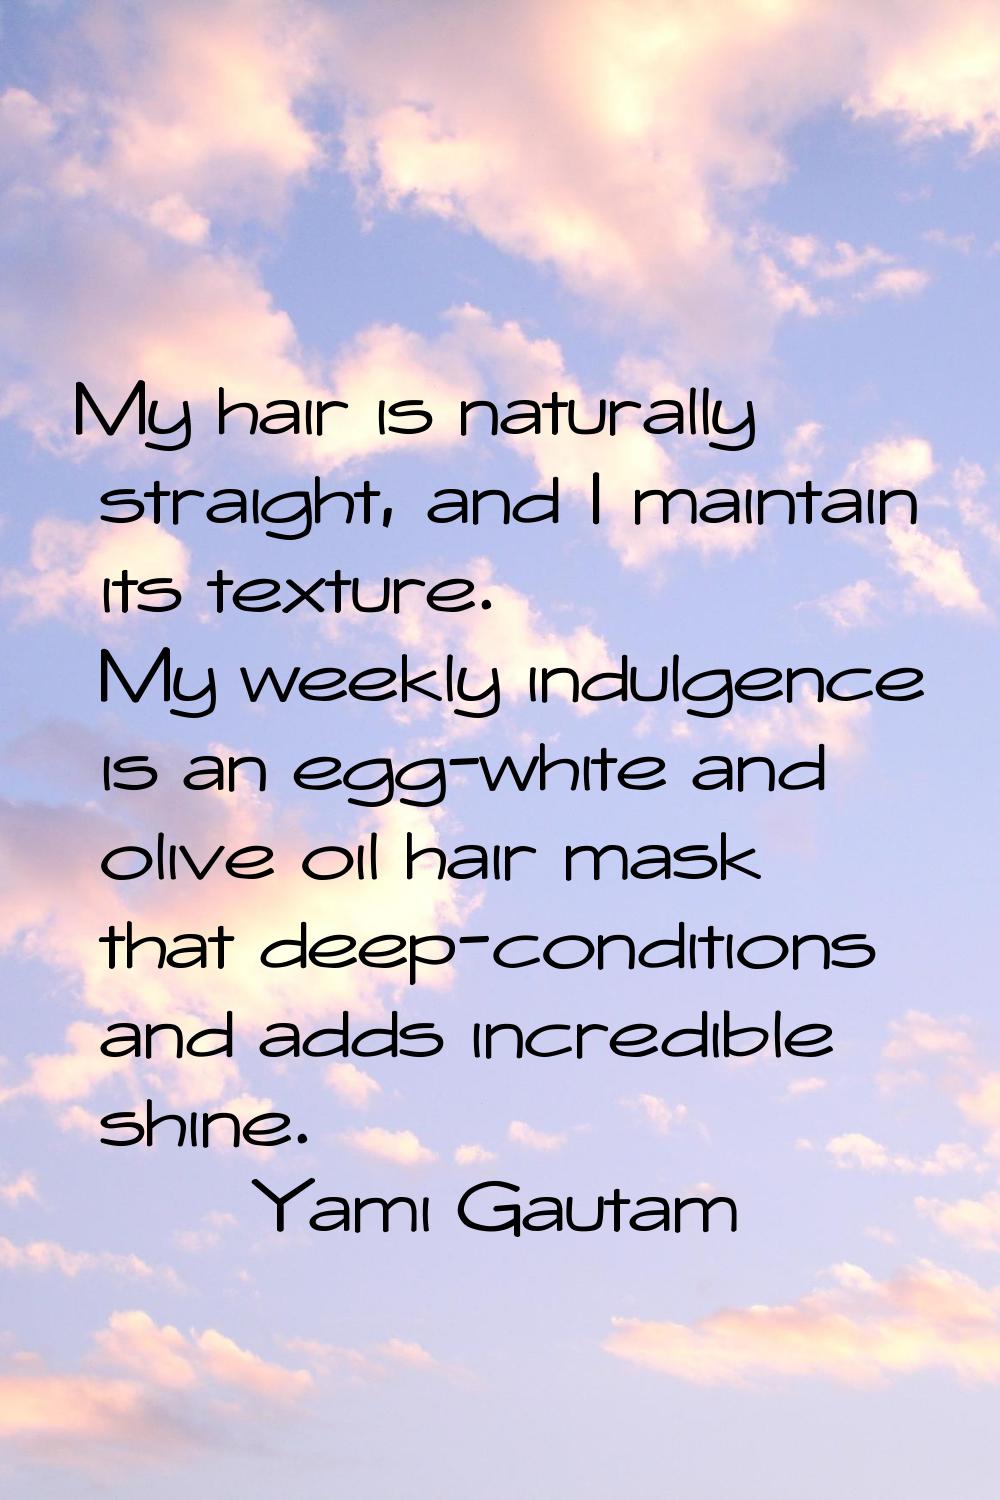 My hair is naturally straight, and I maintain its texture. My weekly indulgence is an egg-white and